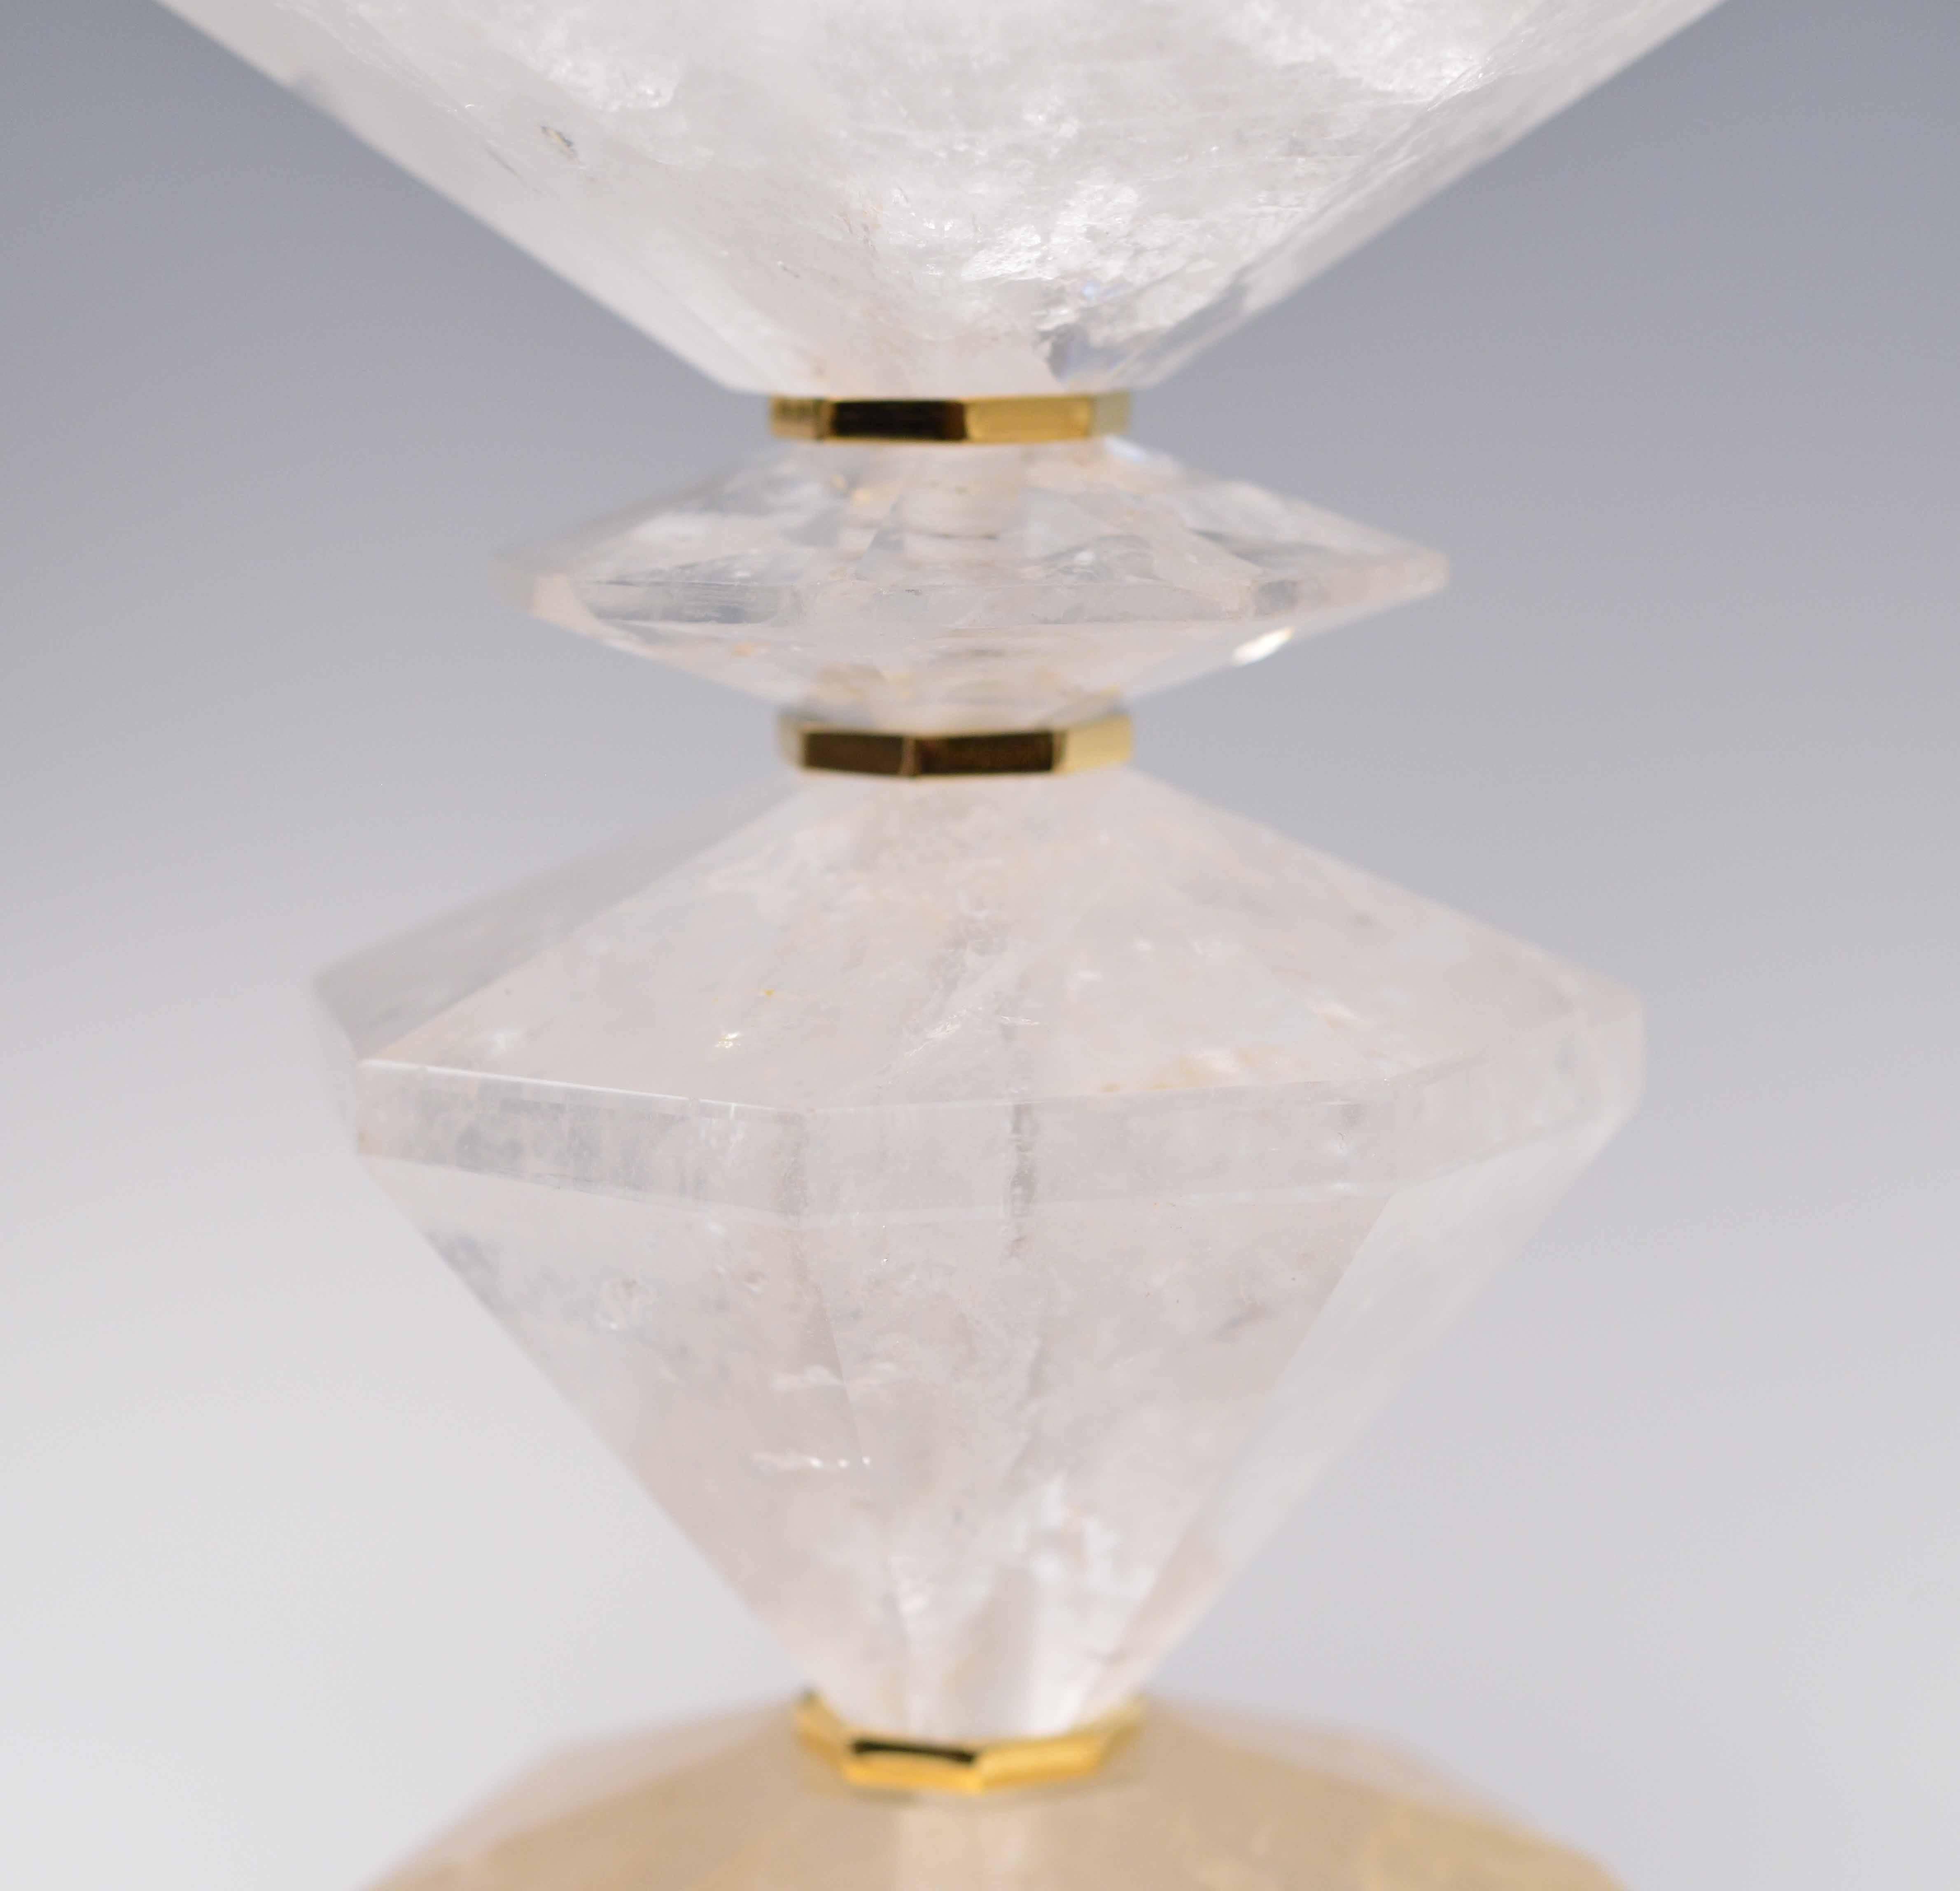 A fine carved diamond form rock crystal lamp quartz lamp with polish brass insert and base, created by Phoenix Gallery, NYC.
Available in nickel plating and antique brass finished. 
To the rock crystal: 22